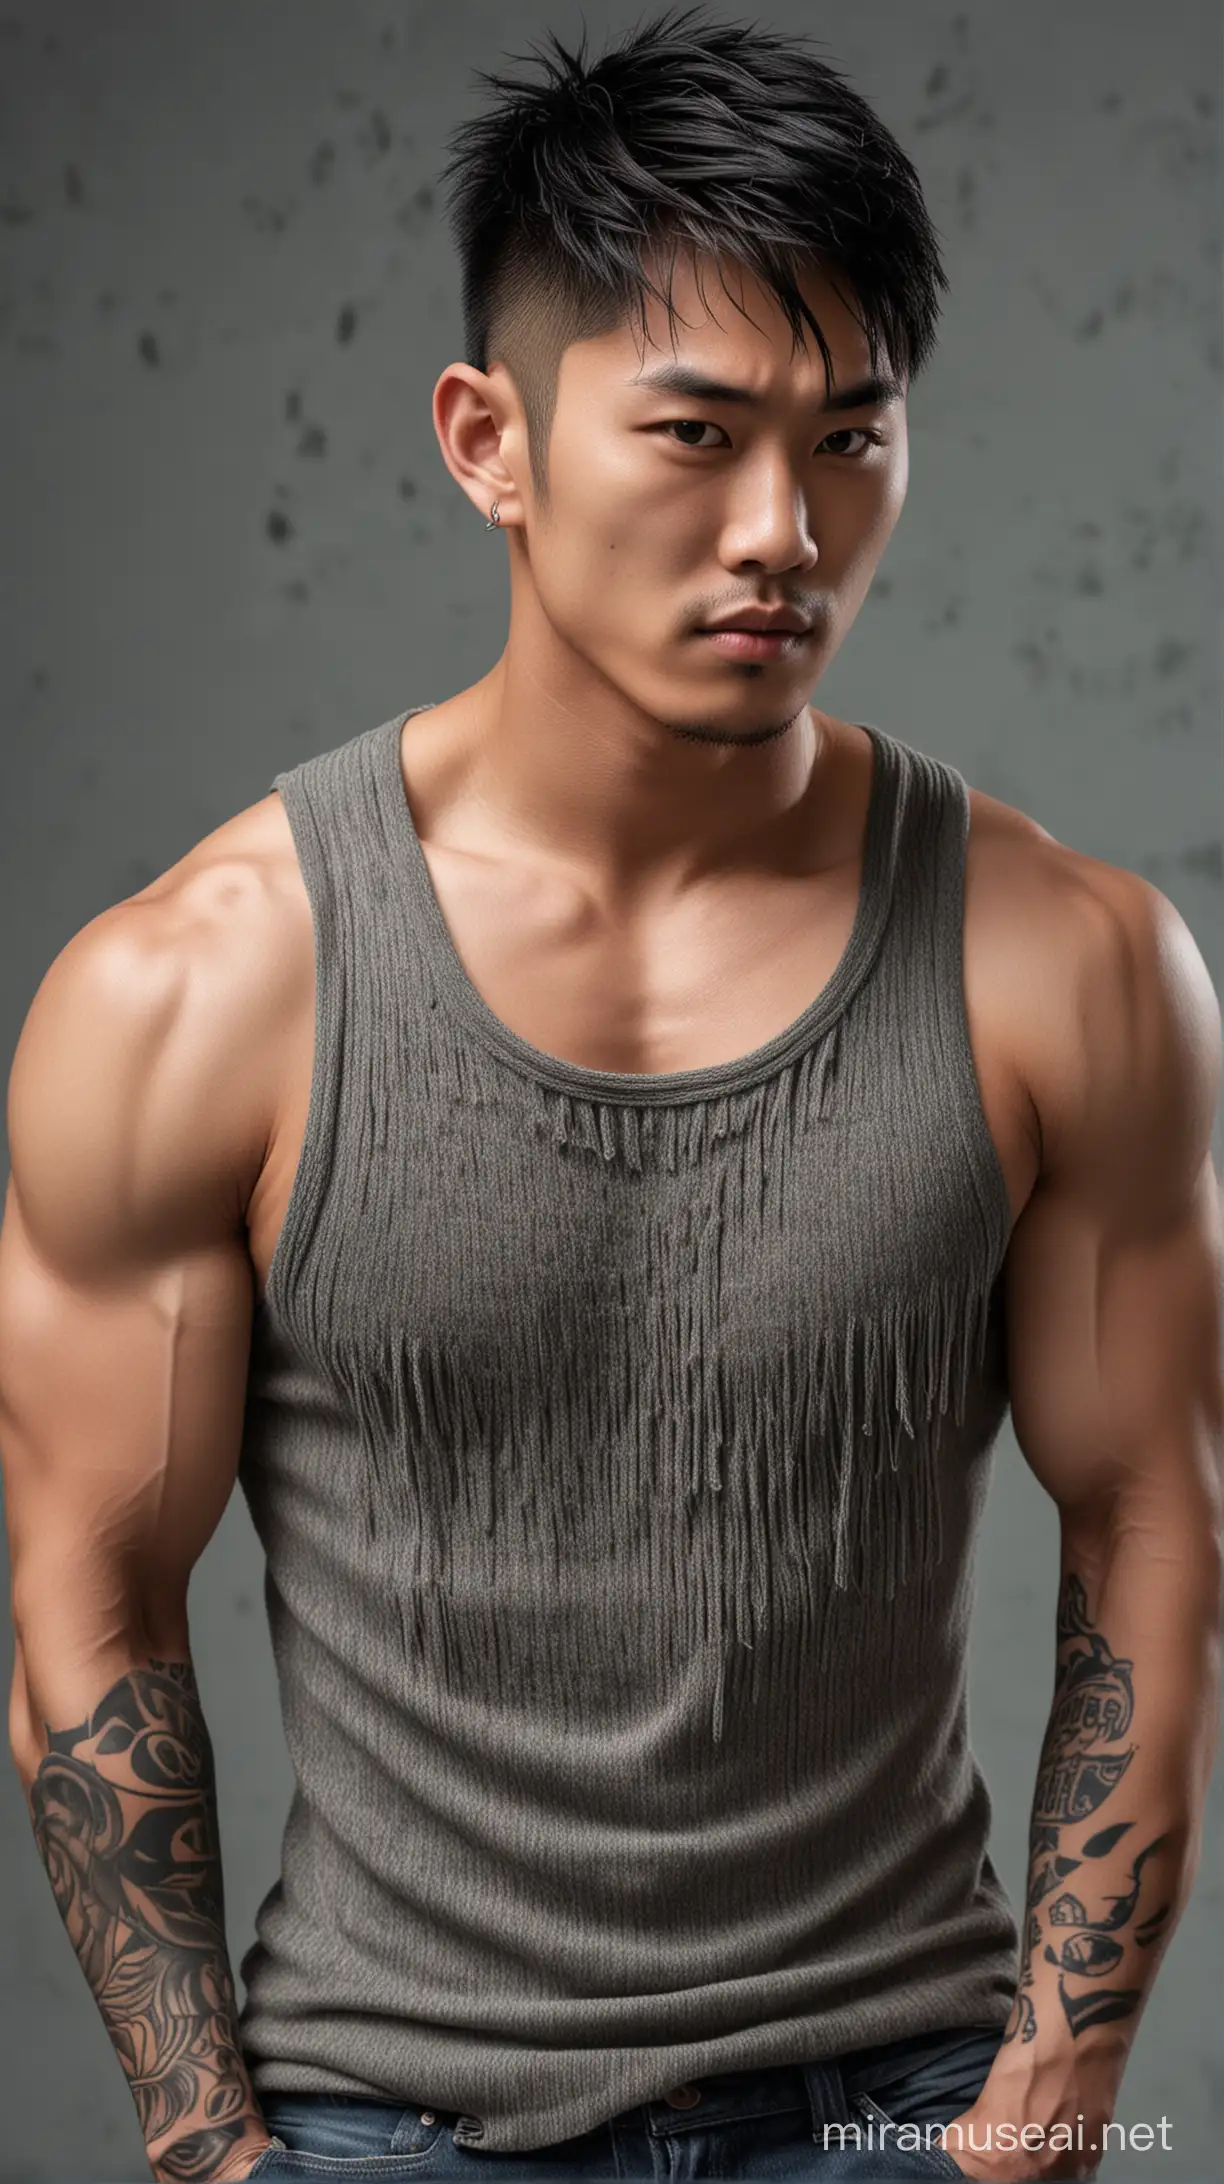 A handsome muscle young asian favour, fringe hair style, tattoo, wearing lithe knit tshit, cool posing 